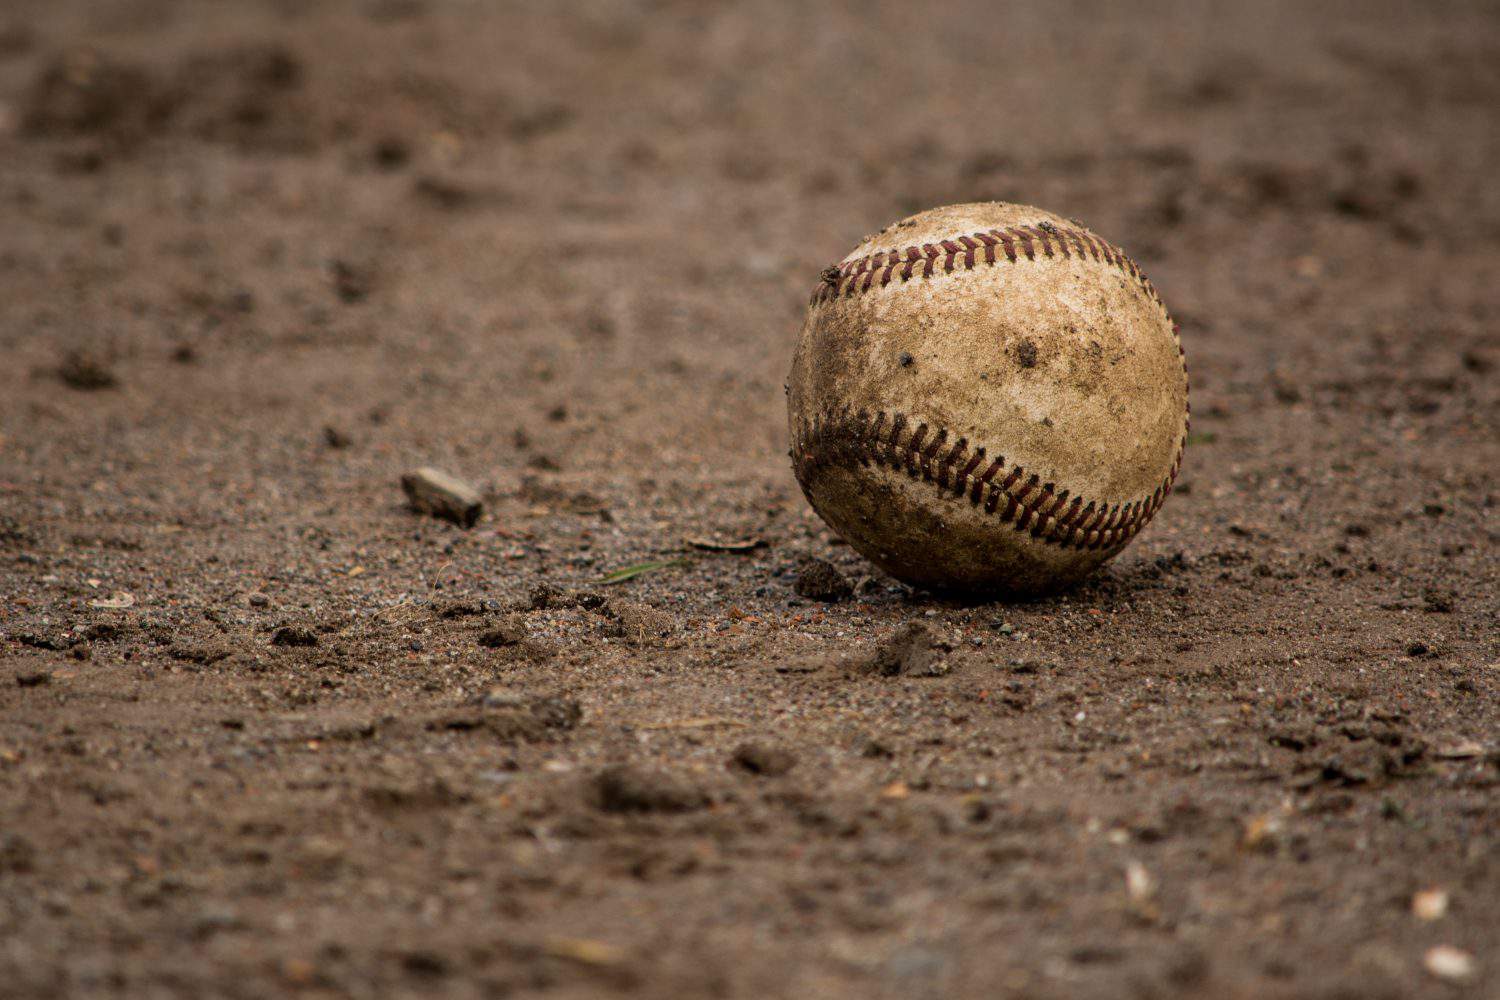 Baseball: A dirty baseball lies on the infield on game day.